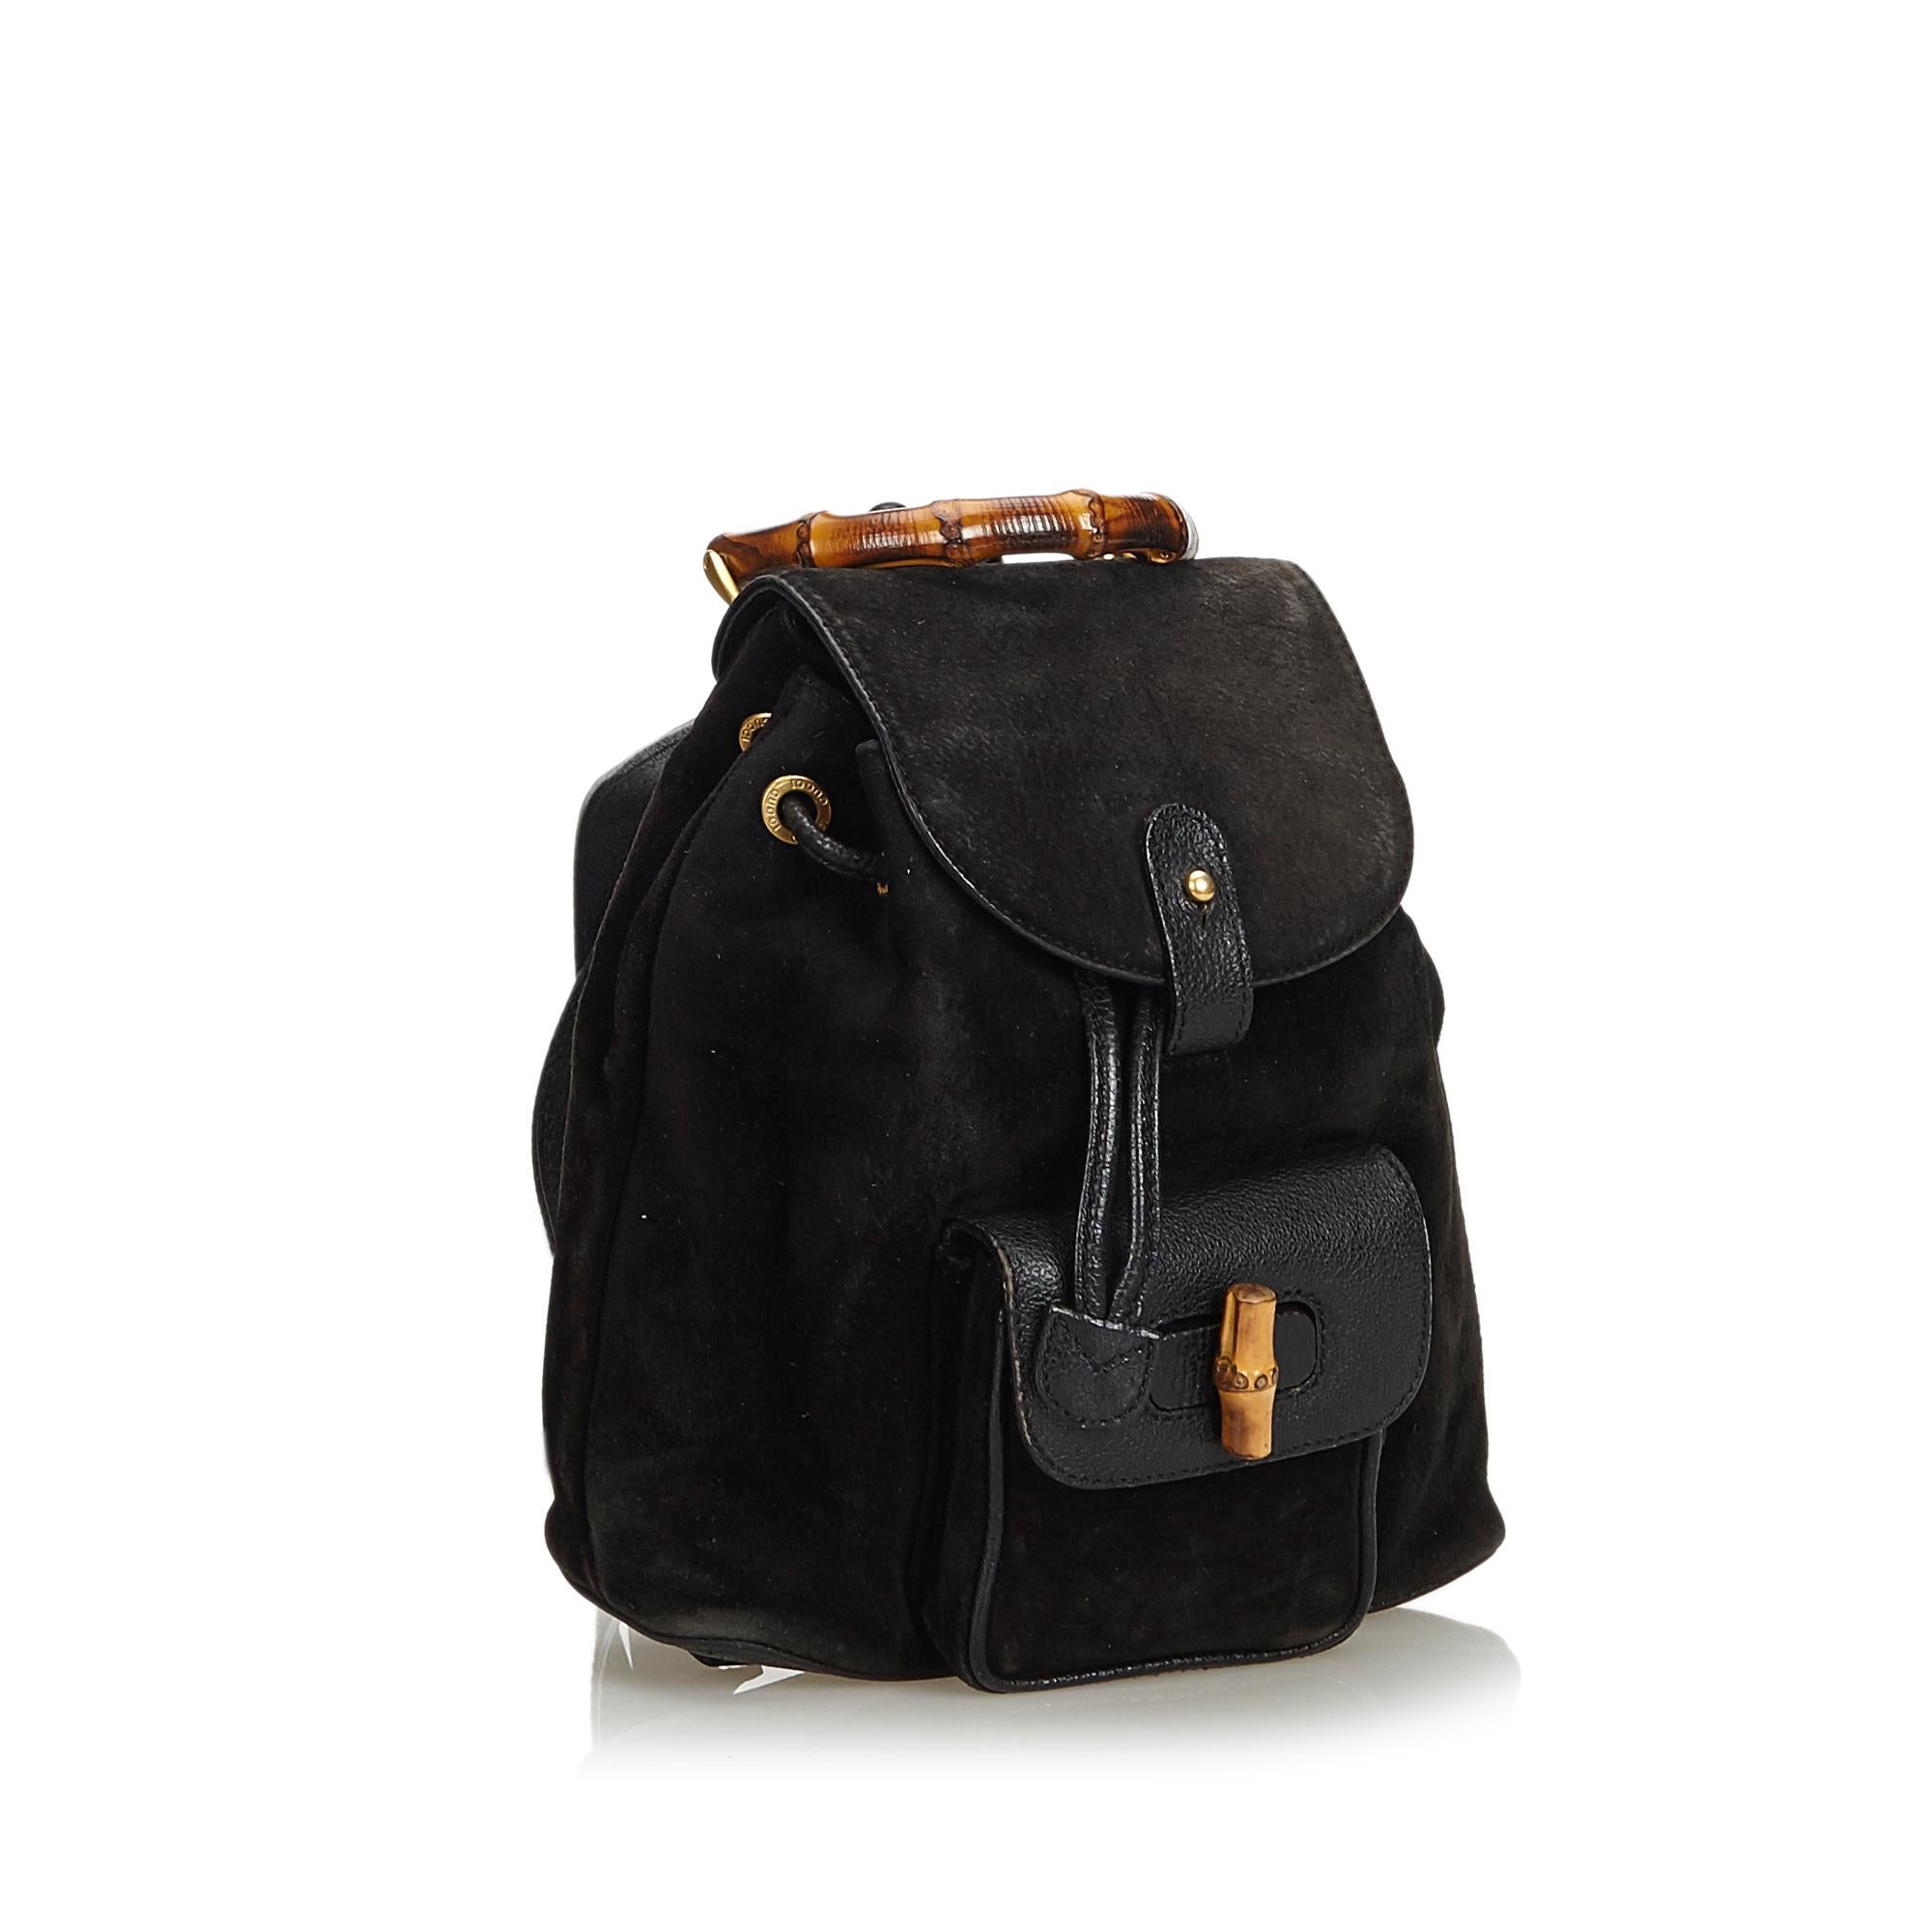 This backpack features a suede body, an exterior flap pocket with bamboo twist lock closure, flat leather back straps, a bamboo top handle, a top flap with a button closure, a top drawstring closure, and an interior zip pocket. It carries as B+